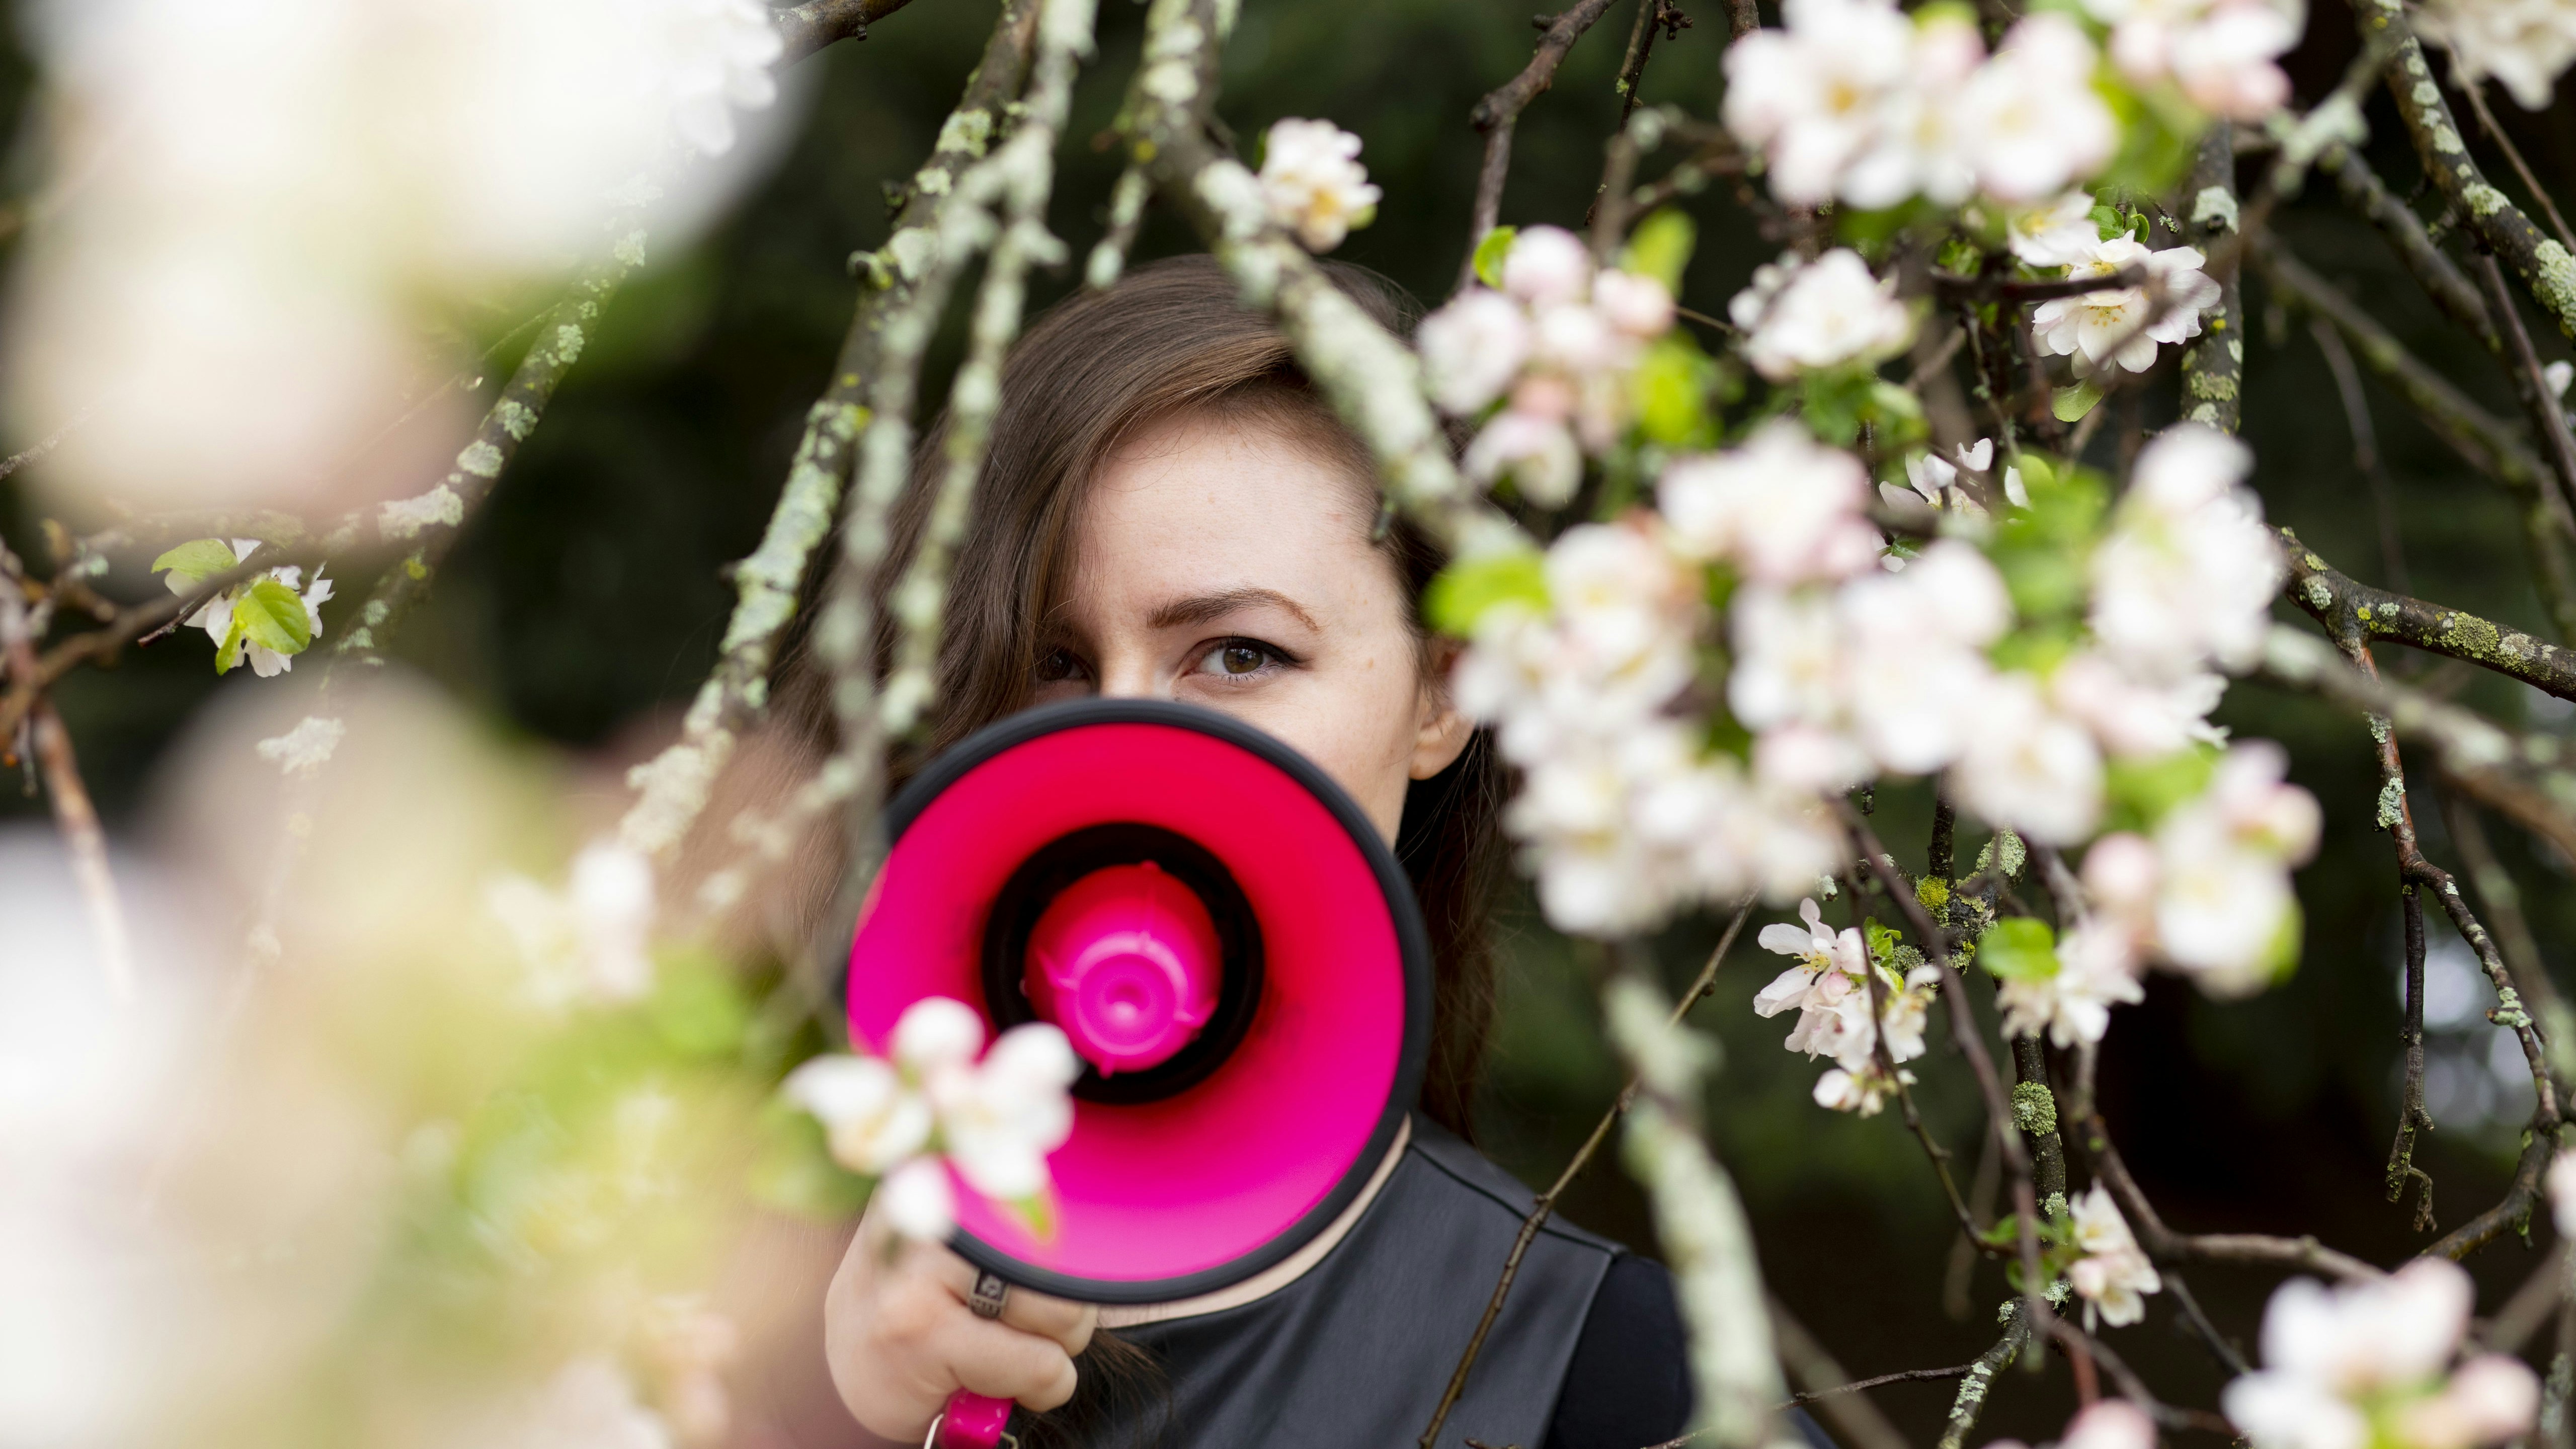 A woman stands among the lilacs, her face partially obscured by a fuchsia megaphone.